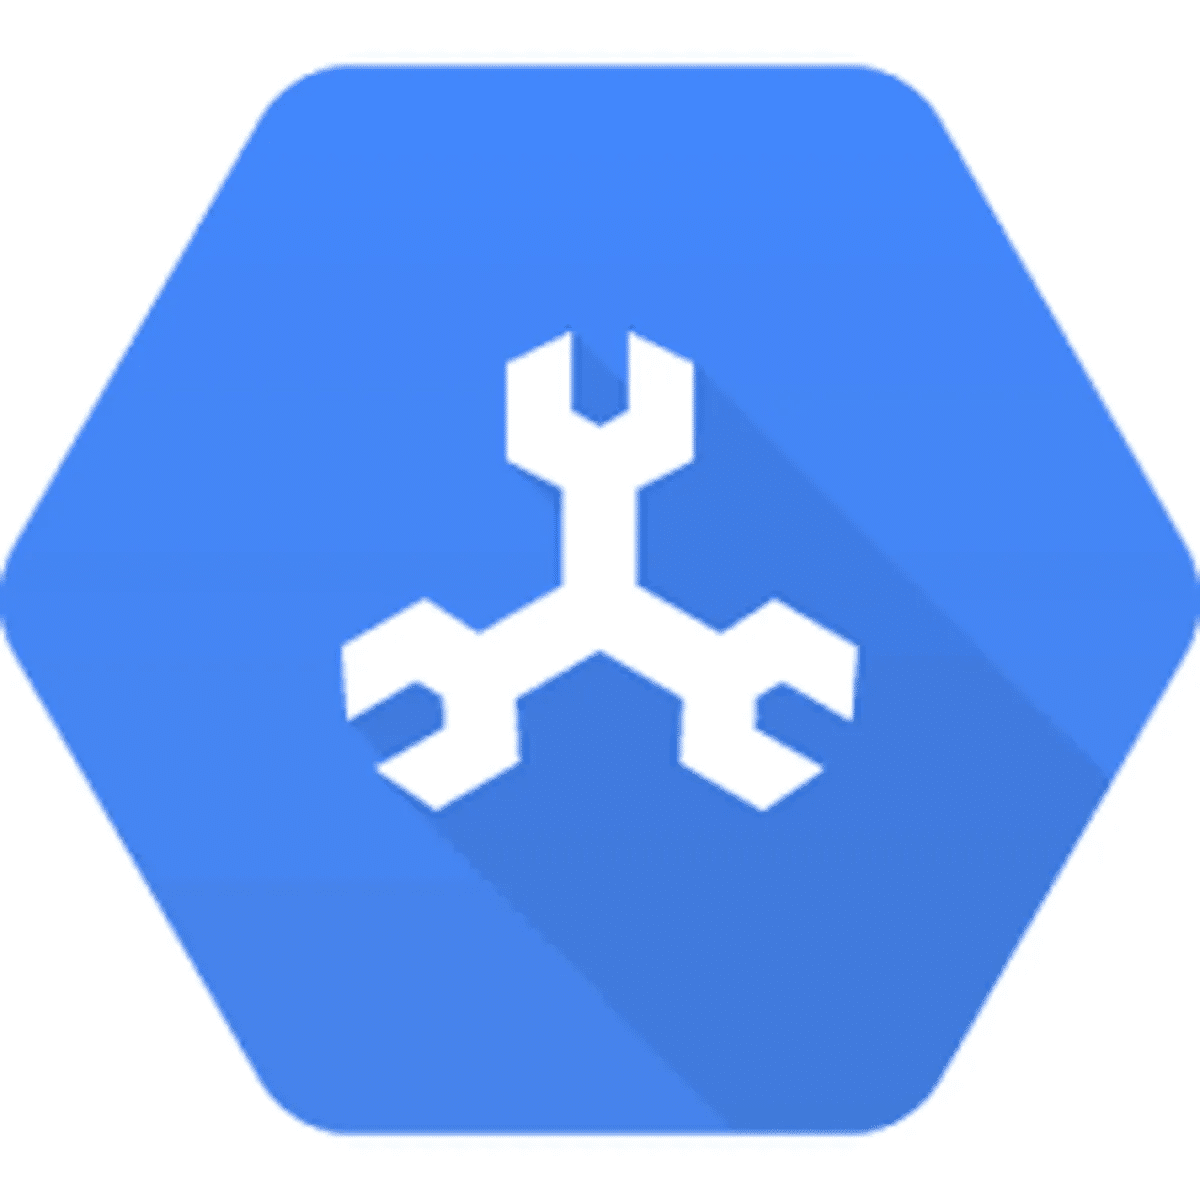 Spanner is a distributed SQL database management and storage service developed by Google.